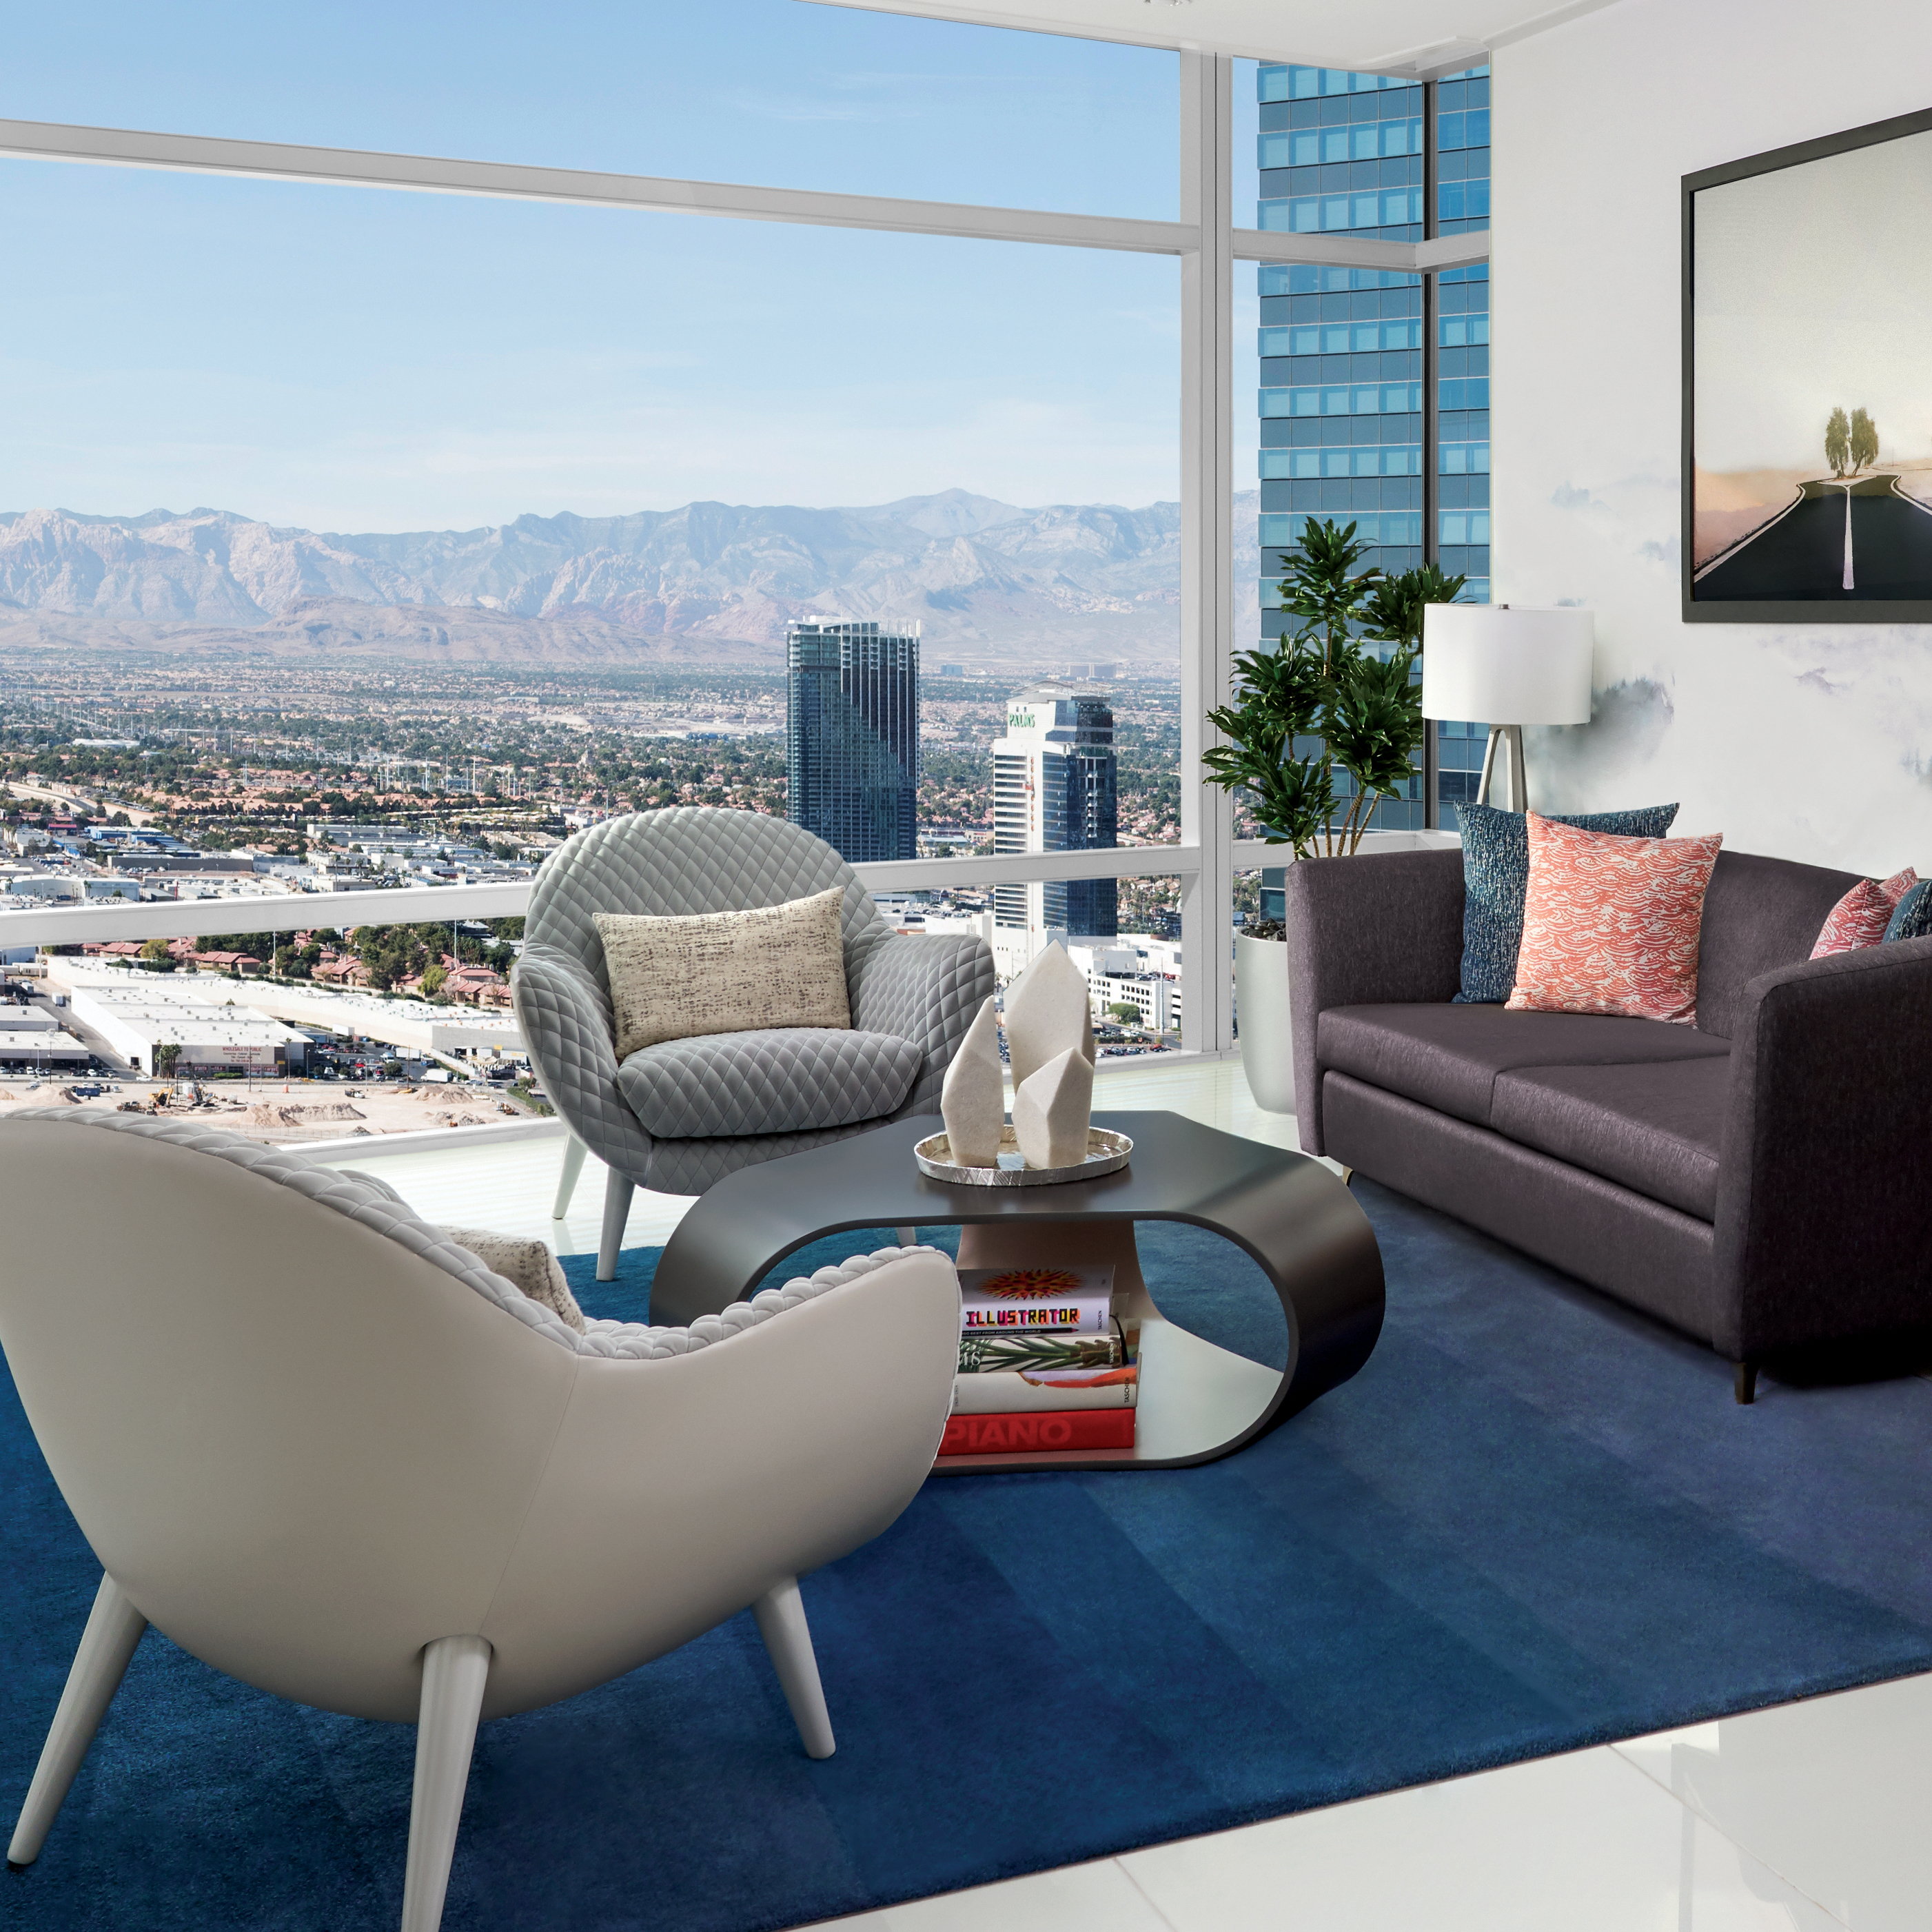 A modern hotel living room with a couch, armchair, and coffee table arranged in a seating area facing large floor-to-ceiling windows. The windows offer a panoramic view of a city skyline and mountains in the distance.